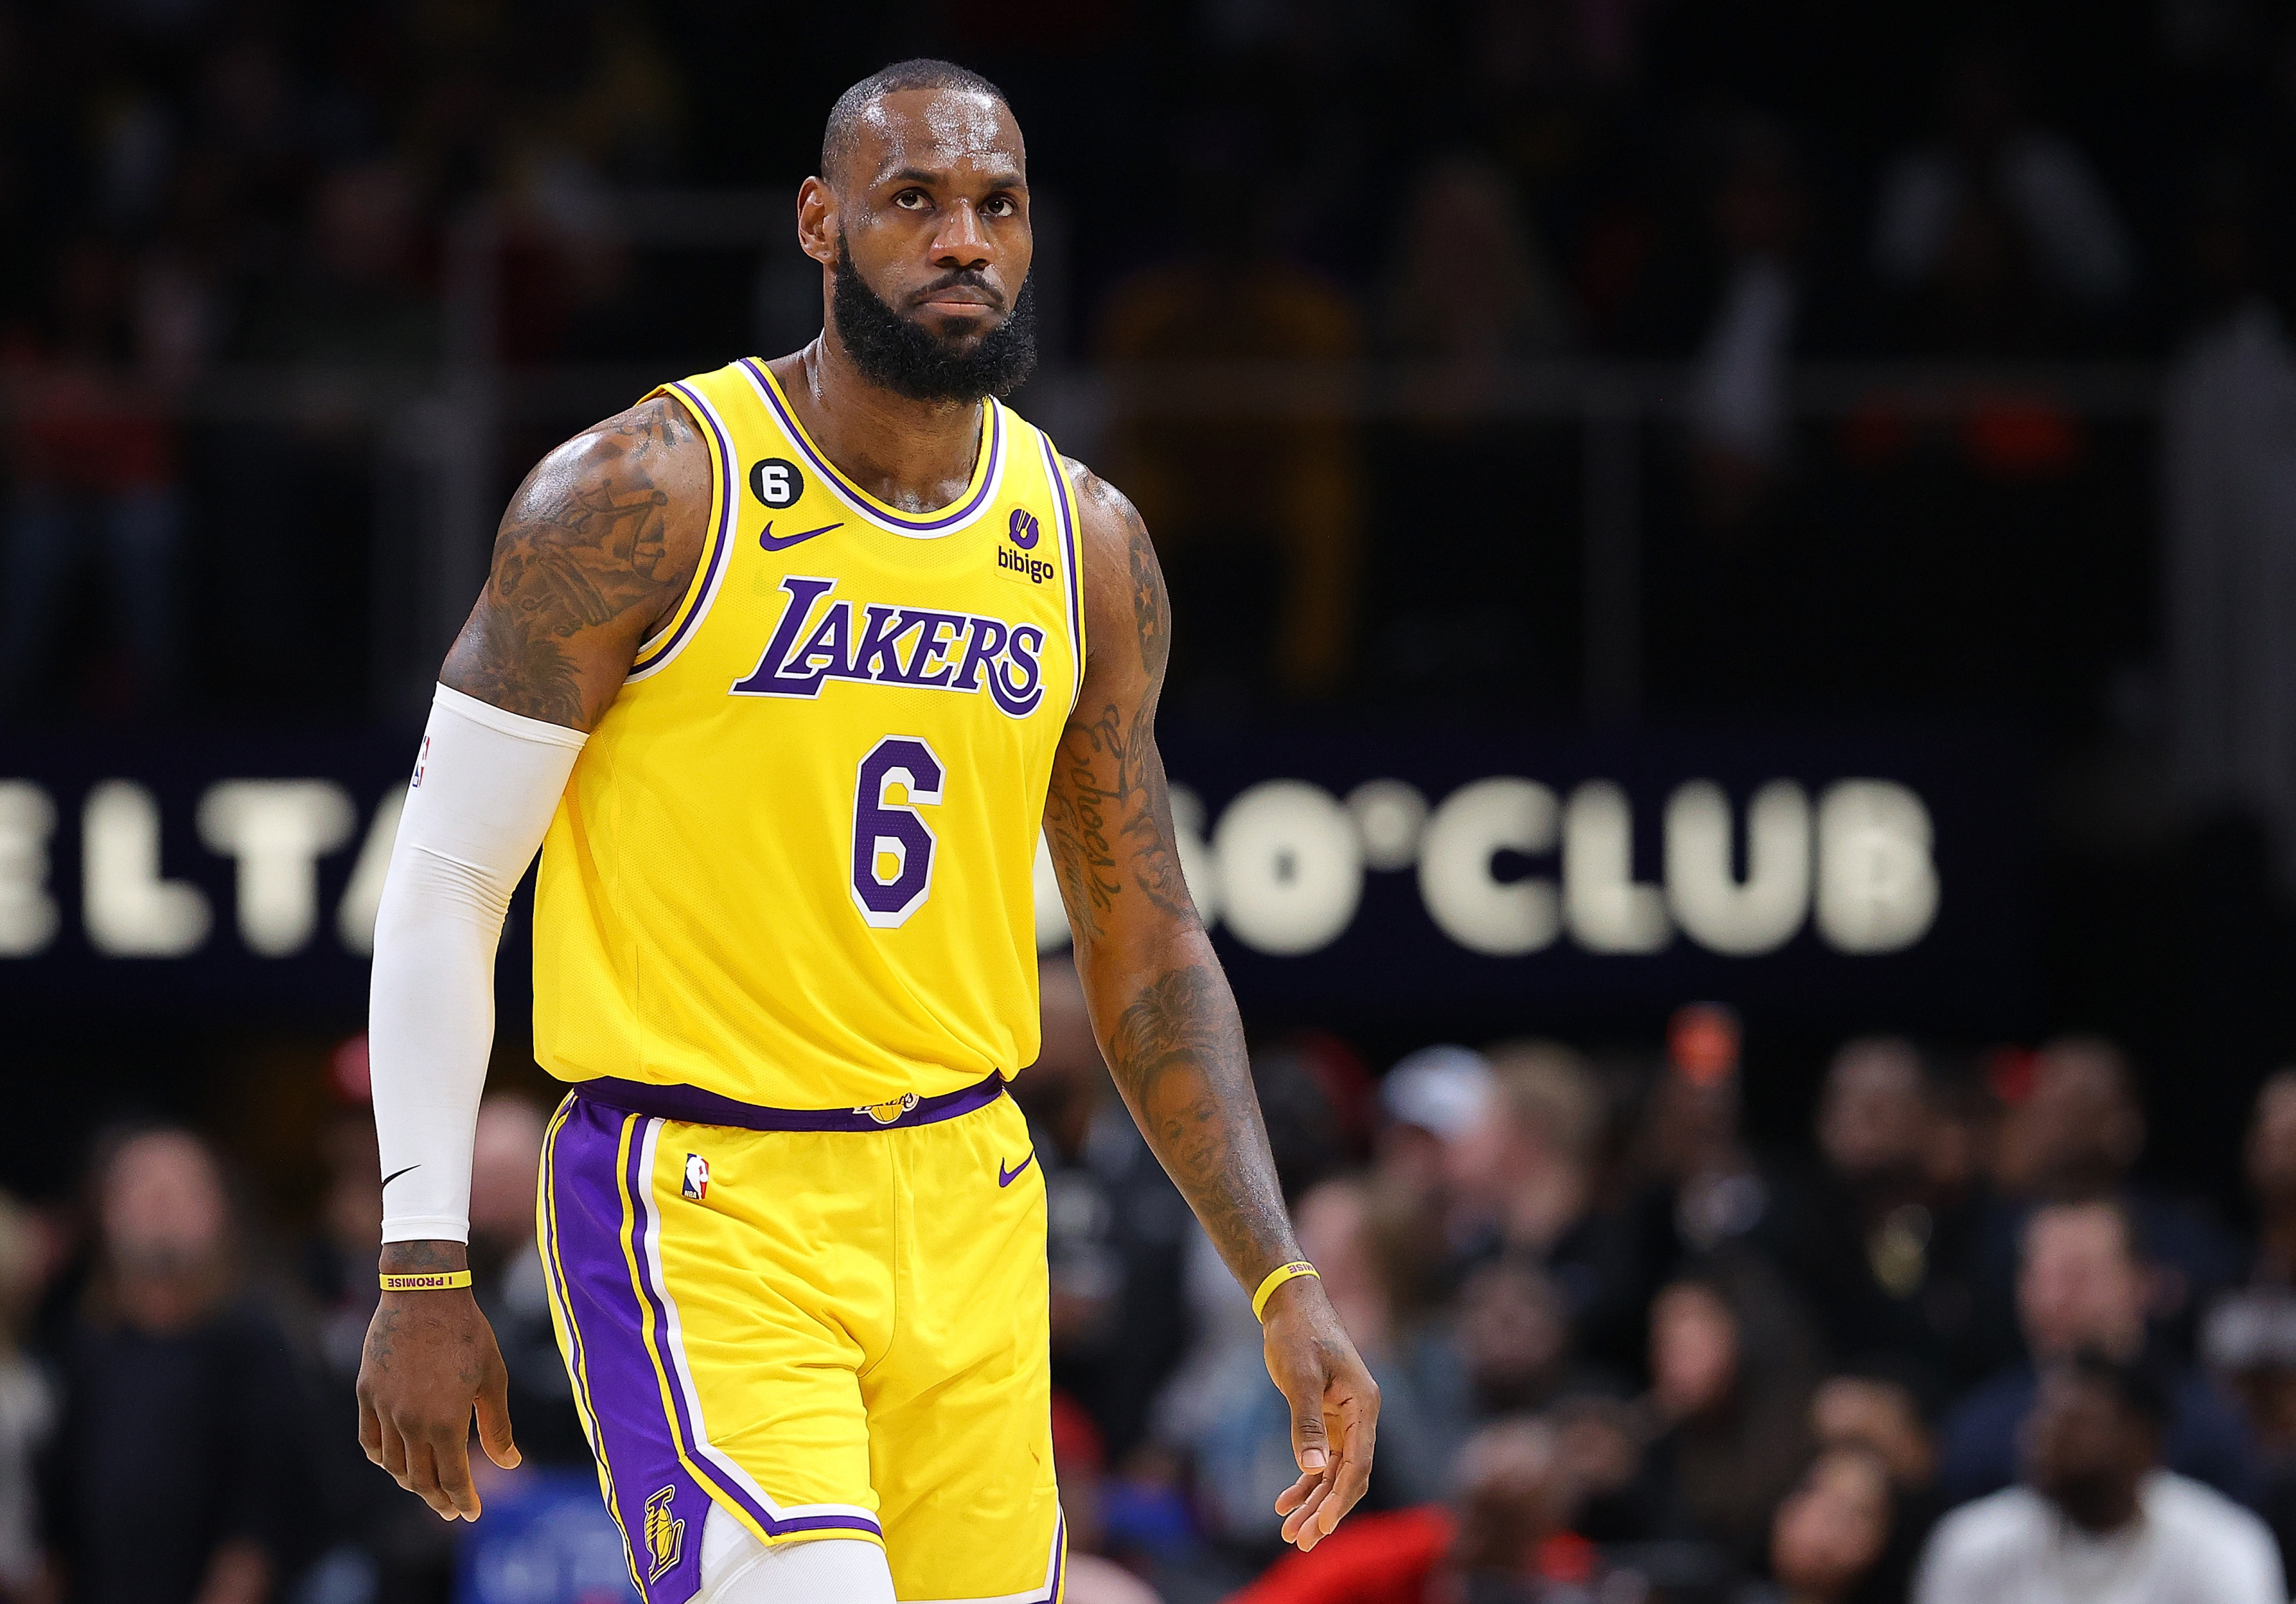 LeBron James and Lakers force their way past Rockets, take series